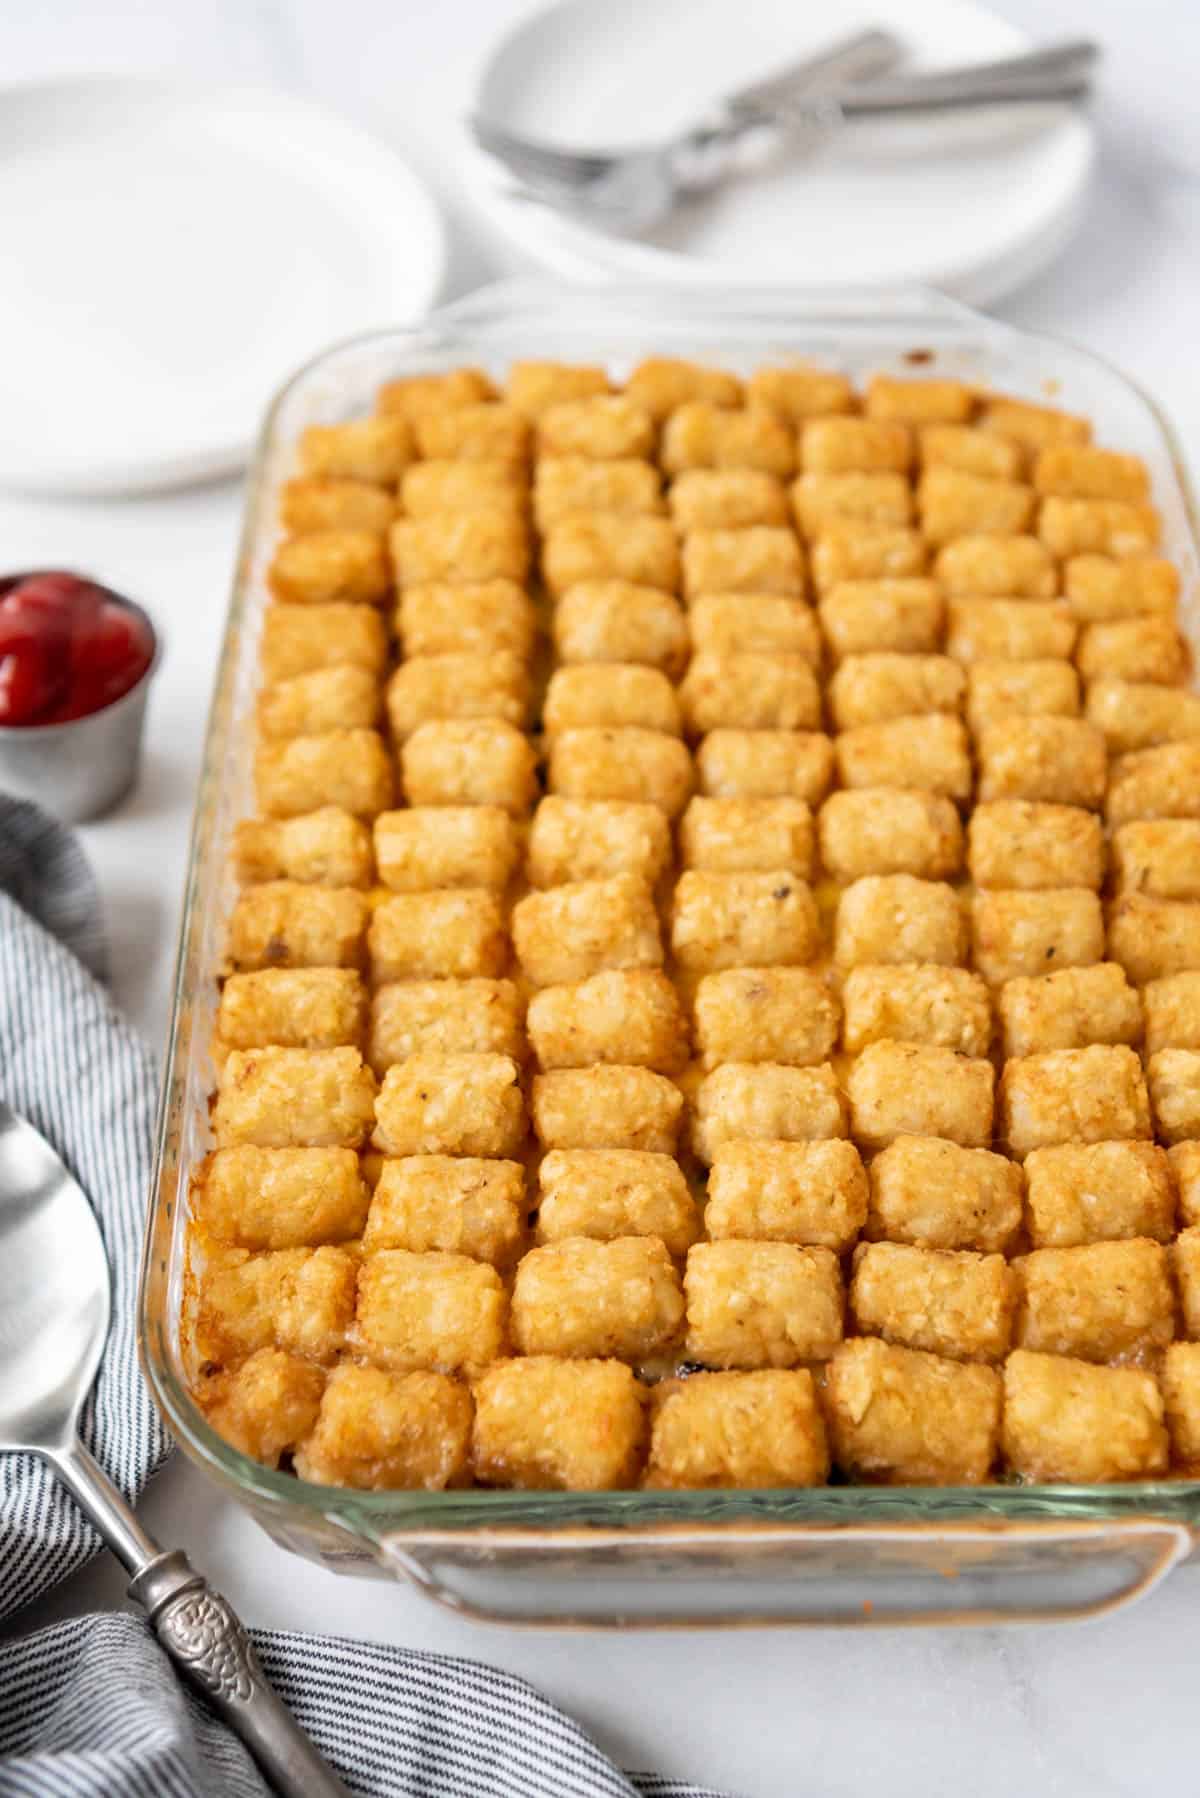 Baked tater tot casserole with the tater tots arranged in rows on top.